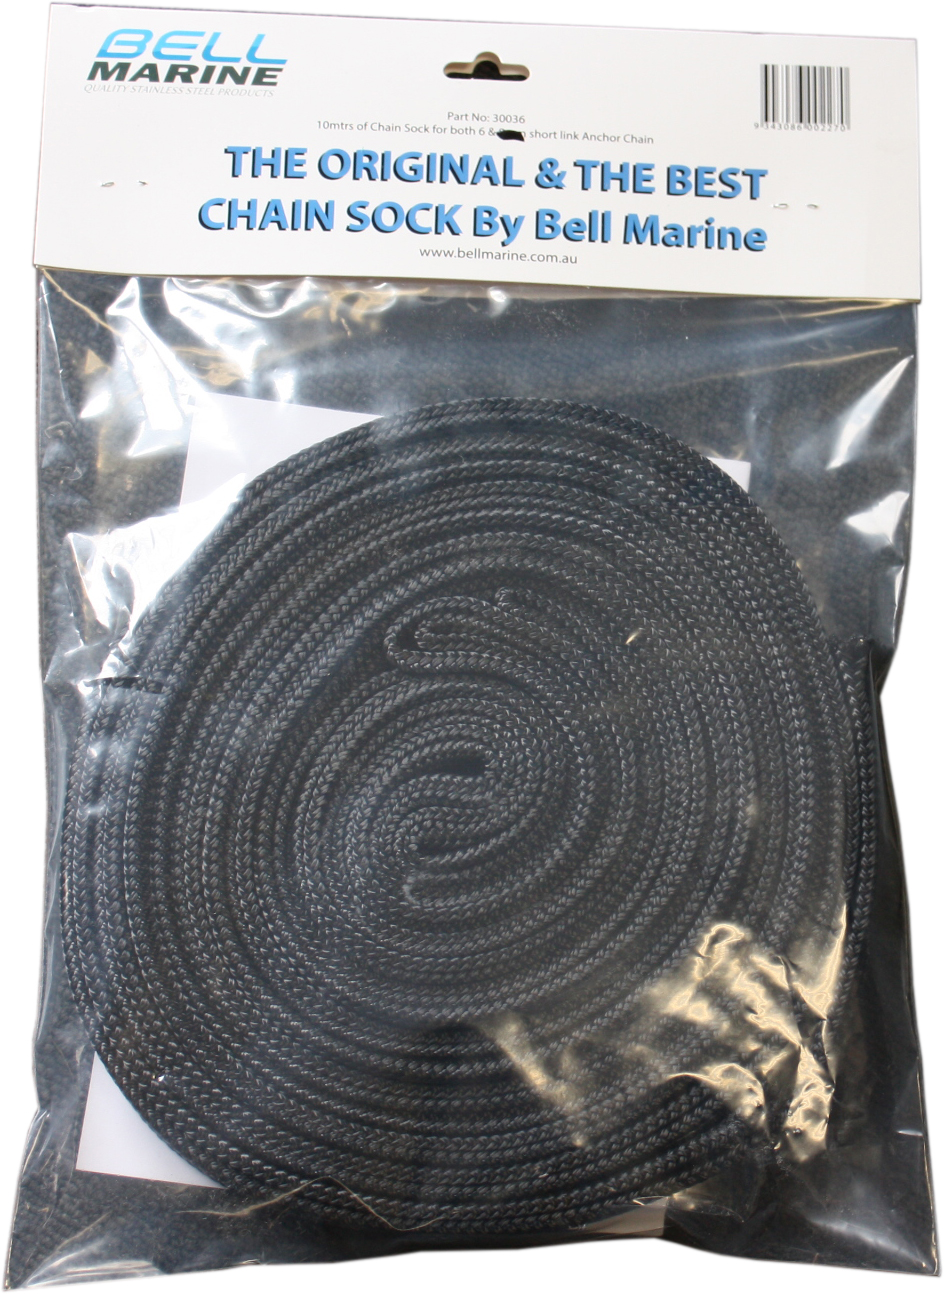 Viper Chain Sock To Suit 8mm Short Link Anchor Chain – 100 Mtr Roll